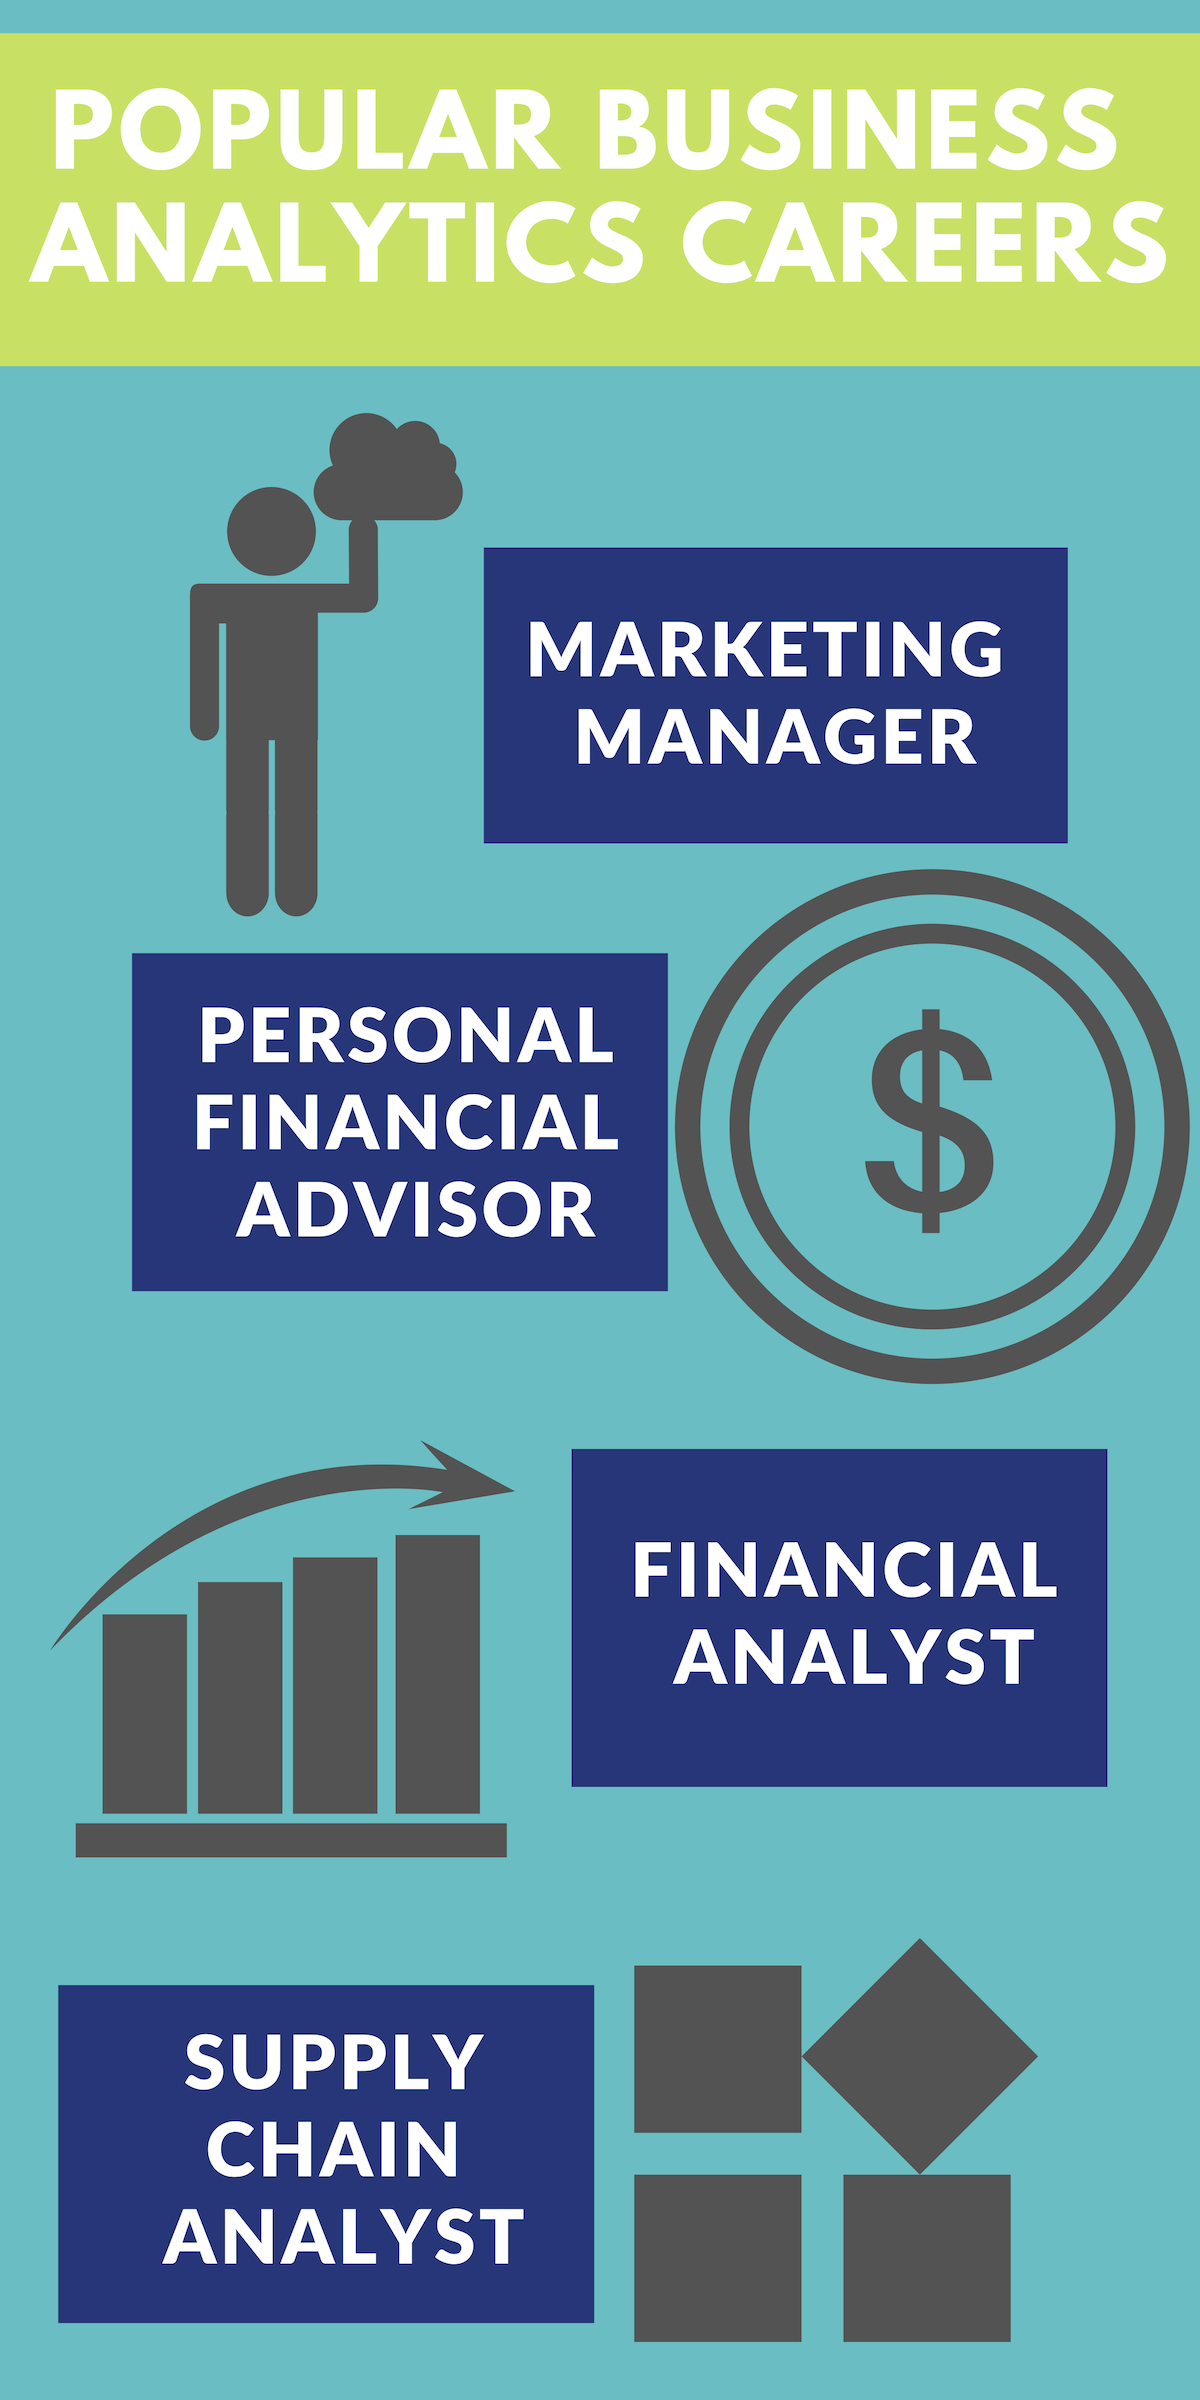 Popular business analytics careers: Marketing Manager, Personal Financial Advisor, Financial Analyst, Supply Chain Analyst